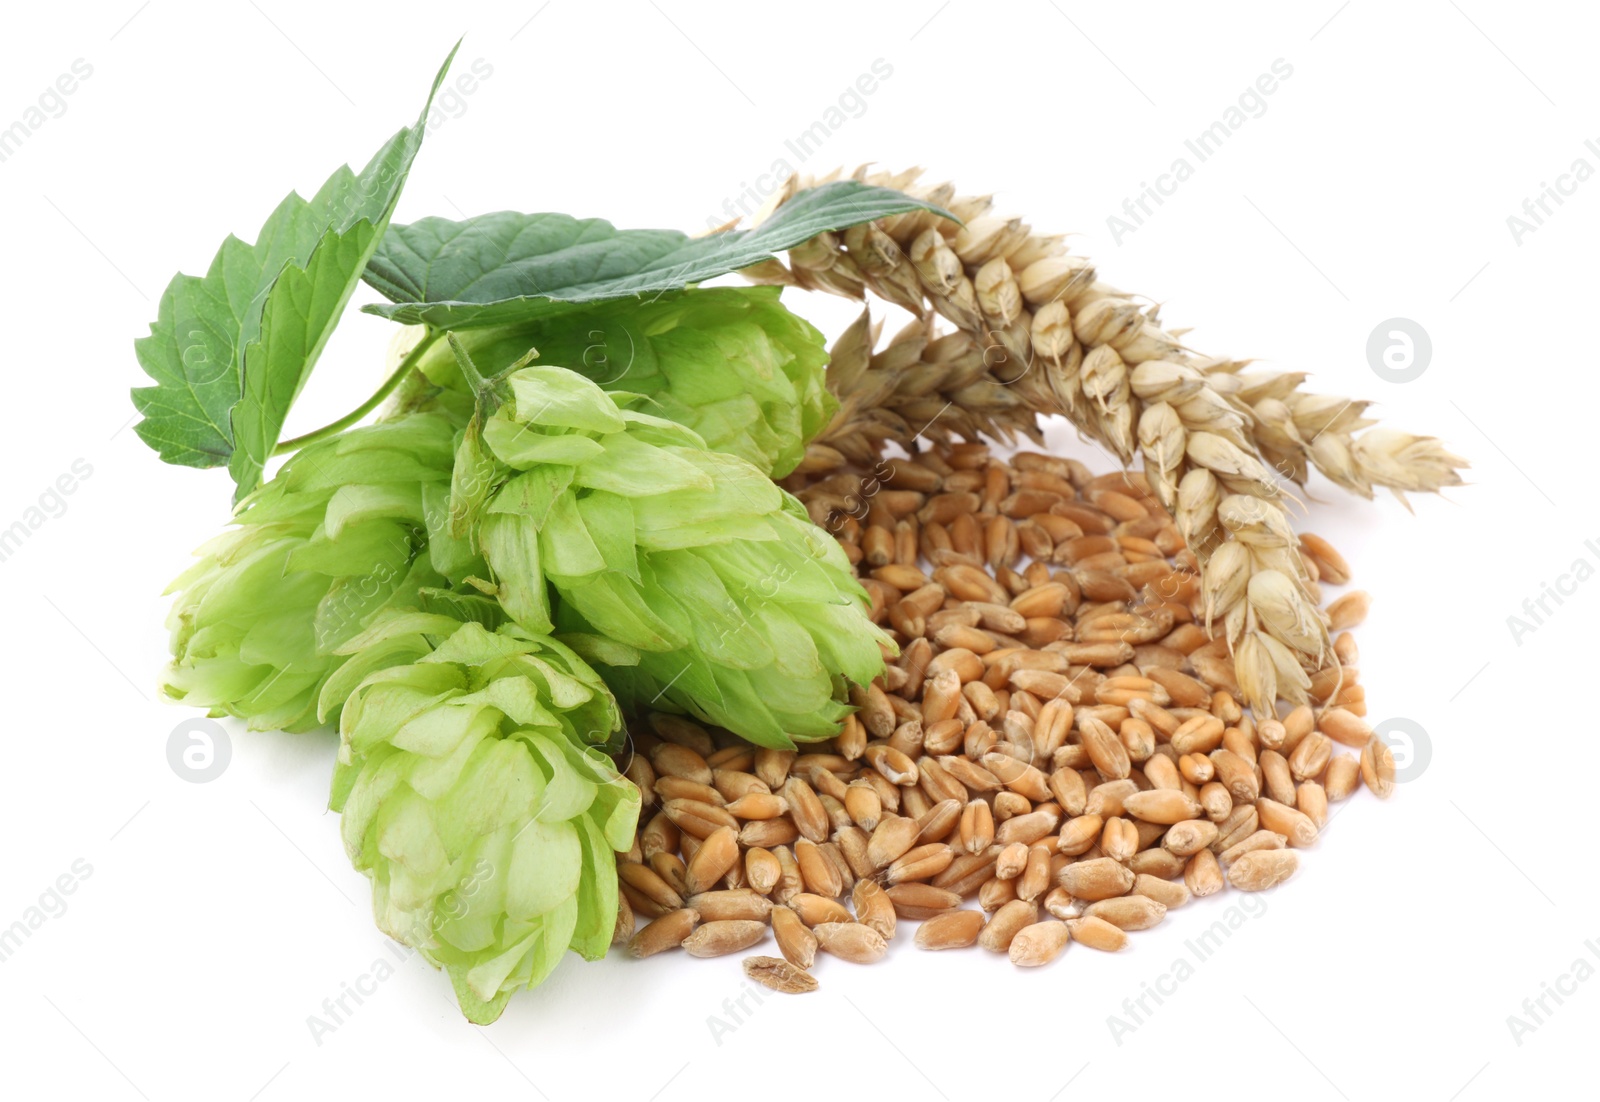 Photo of Fresh green hops, wheat spikes and grains on white background